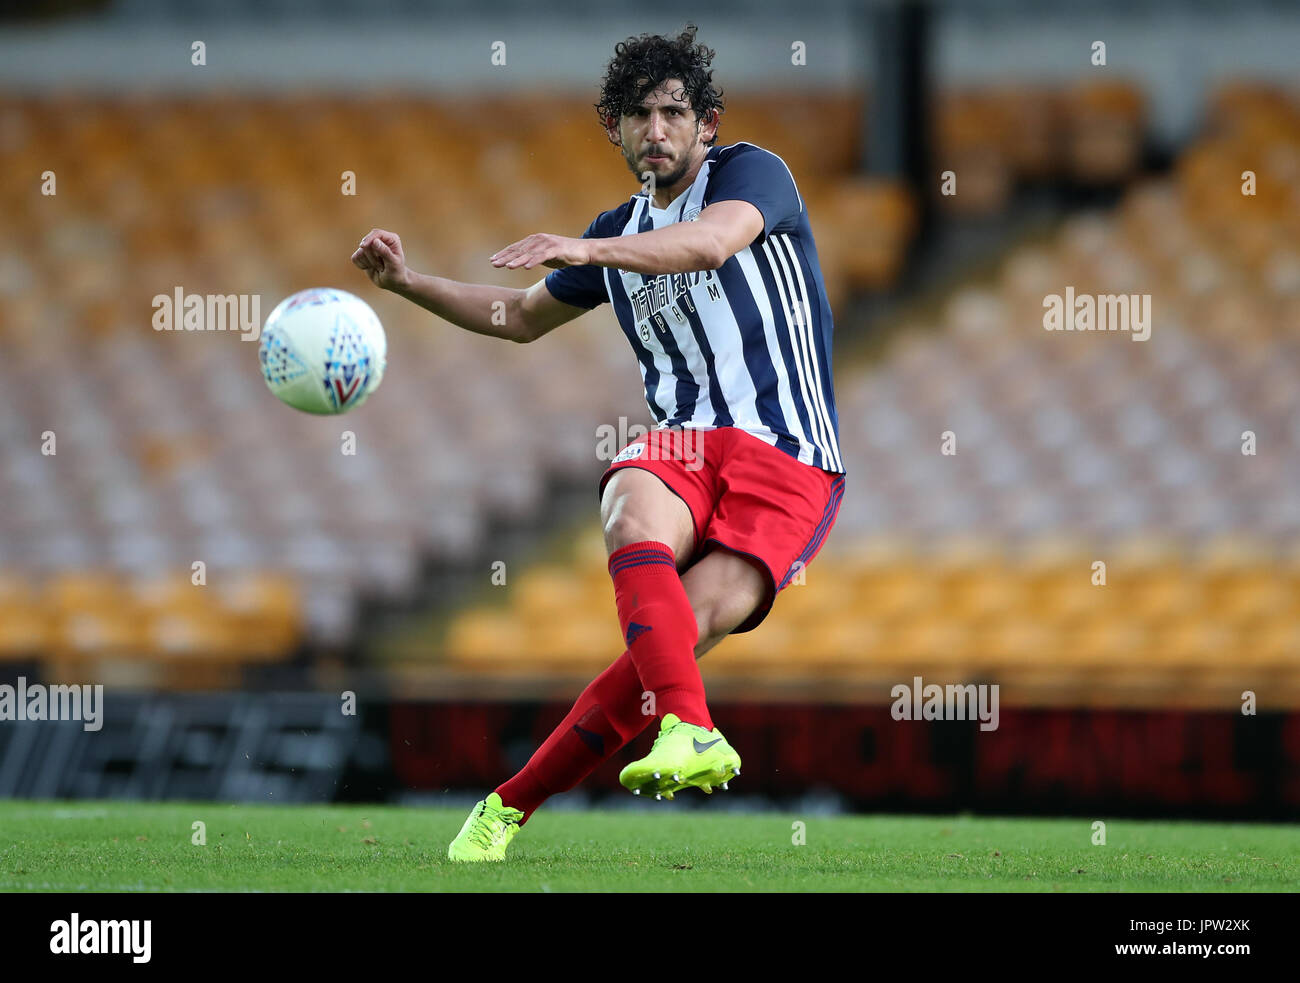 West Bromwich Albion's Ahmed Hegazy during the pre-season friendly match at Vale Park, Stoke. PRESS ASSOCIATION Photo. Picture date: Tuesday August 1, 2017. See PA story SOCCER Port Vale. Photo credit should read: Nick Potts/PA Wire. RESTRICTIONS: EDITORIAL USE ONLY No use with unauthorised audio, video, data, fixture lists, club/league logos or 'live' services. Online in-match use limited to 75 images, no video emulation. No use in betting, games or single club/league/player publications. Stock Photo